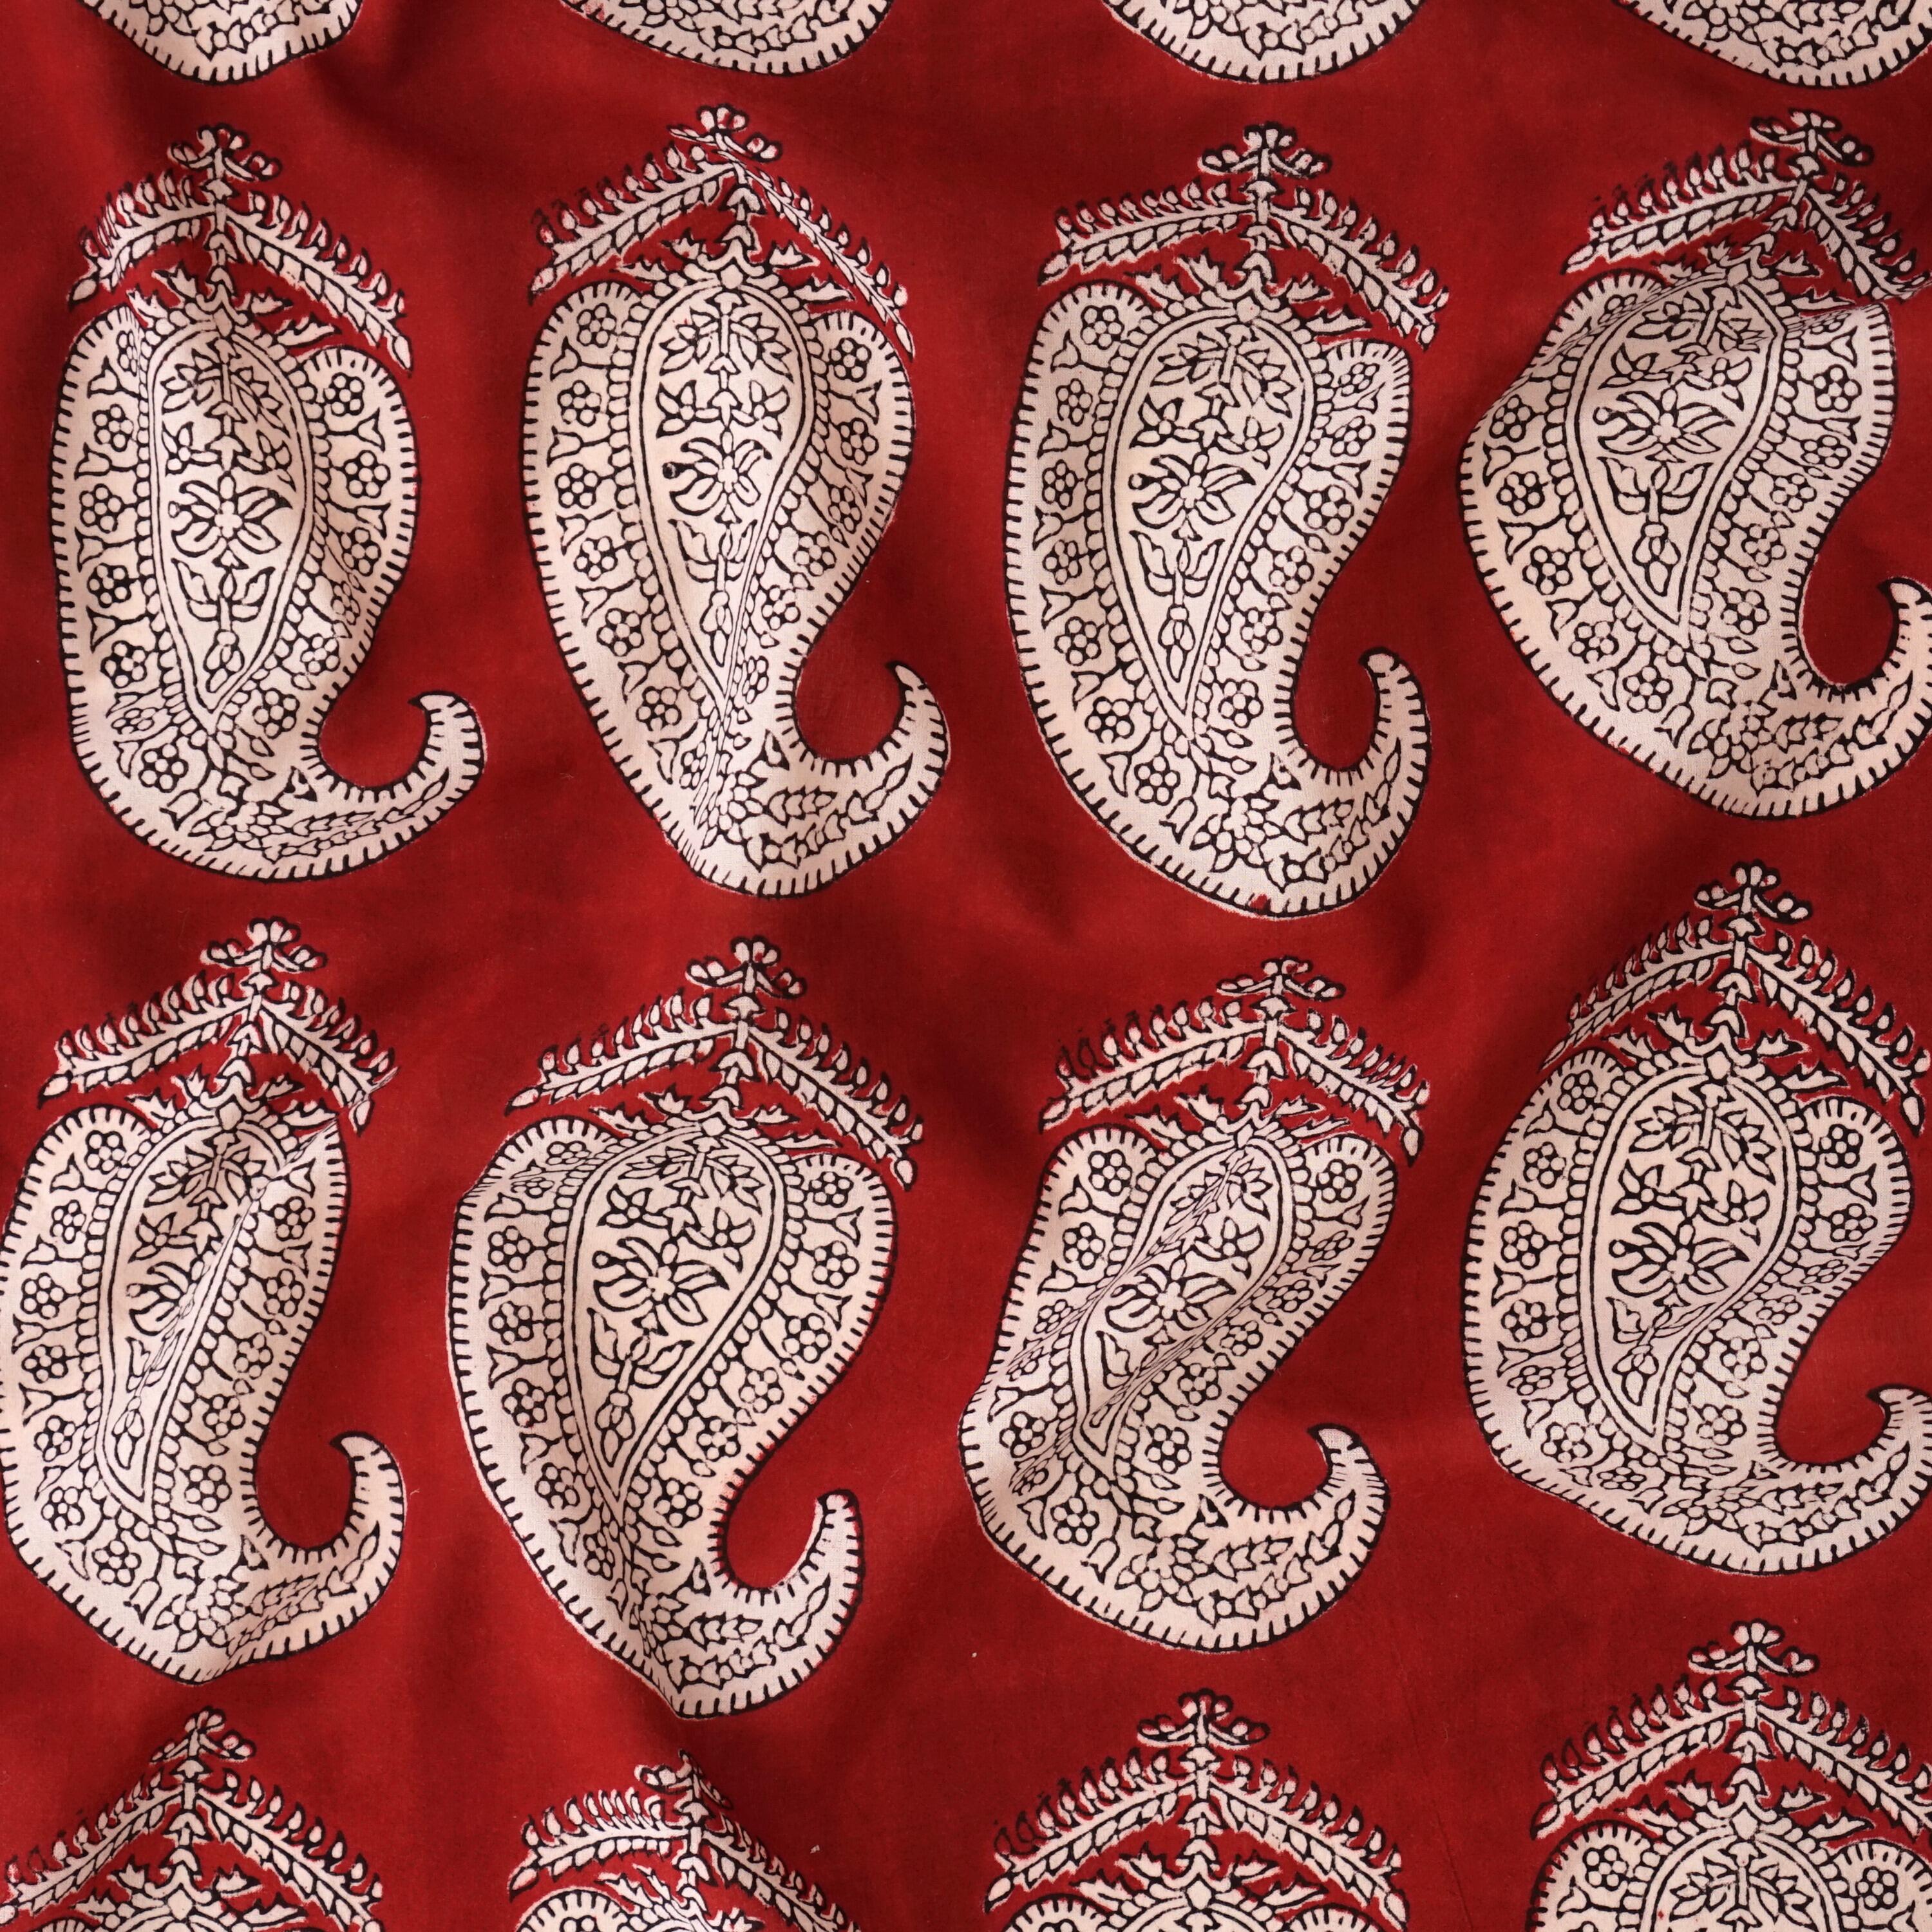 100% Block-Printed Cotton Fabric From India - Breadfruit Design - Iron Rust Black & Alizarin Red Dyes - Contrast